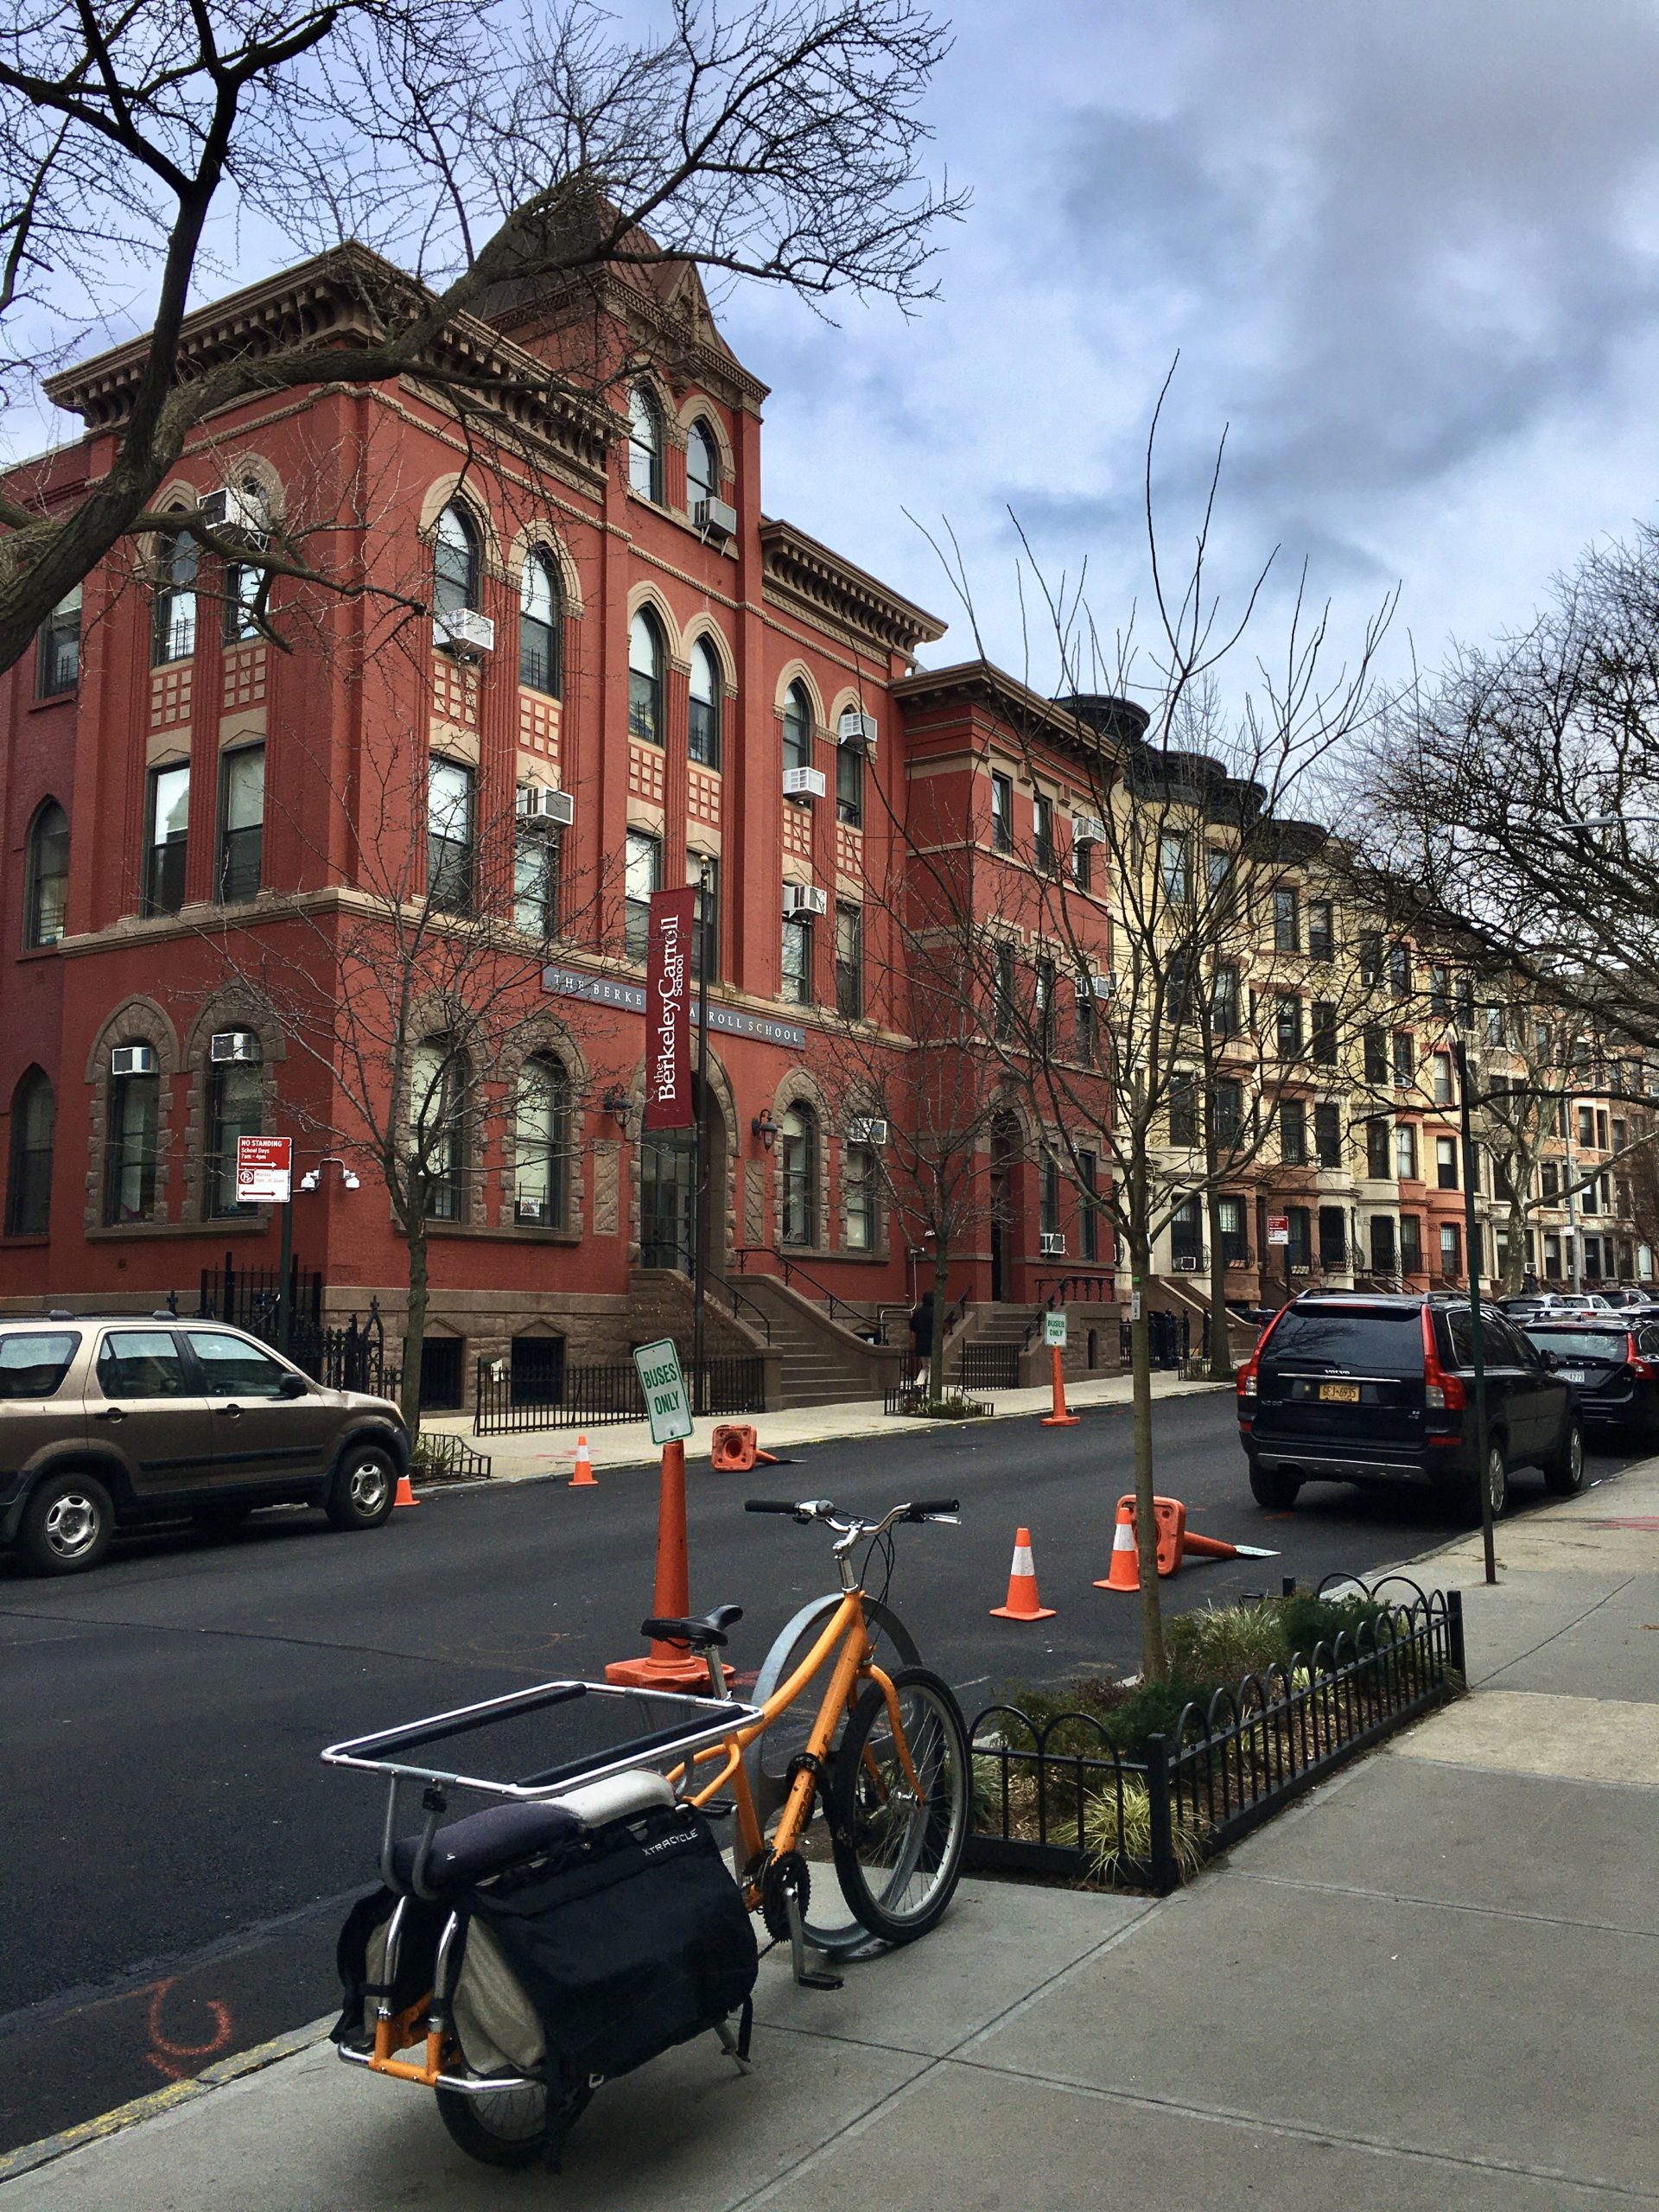 A row of residential buildings stands on Carroll Street beside an old-fashioned Berkeley Carroll School building. Photo: Lore Croghan/Brooklyn Eagle